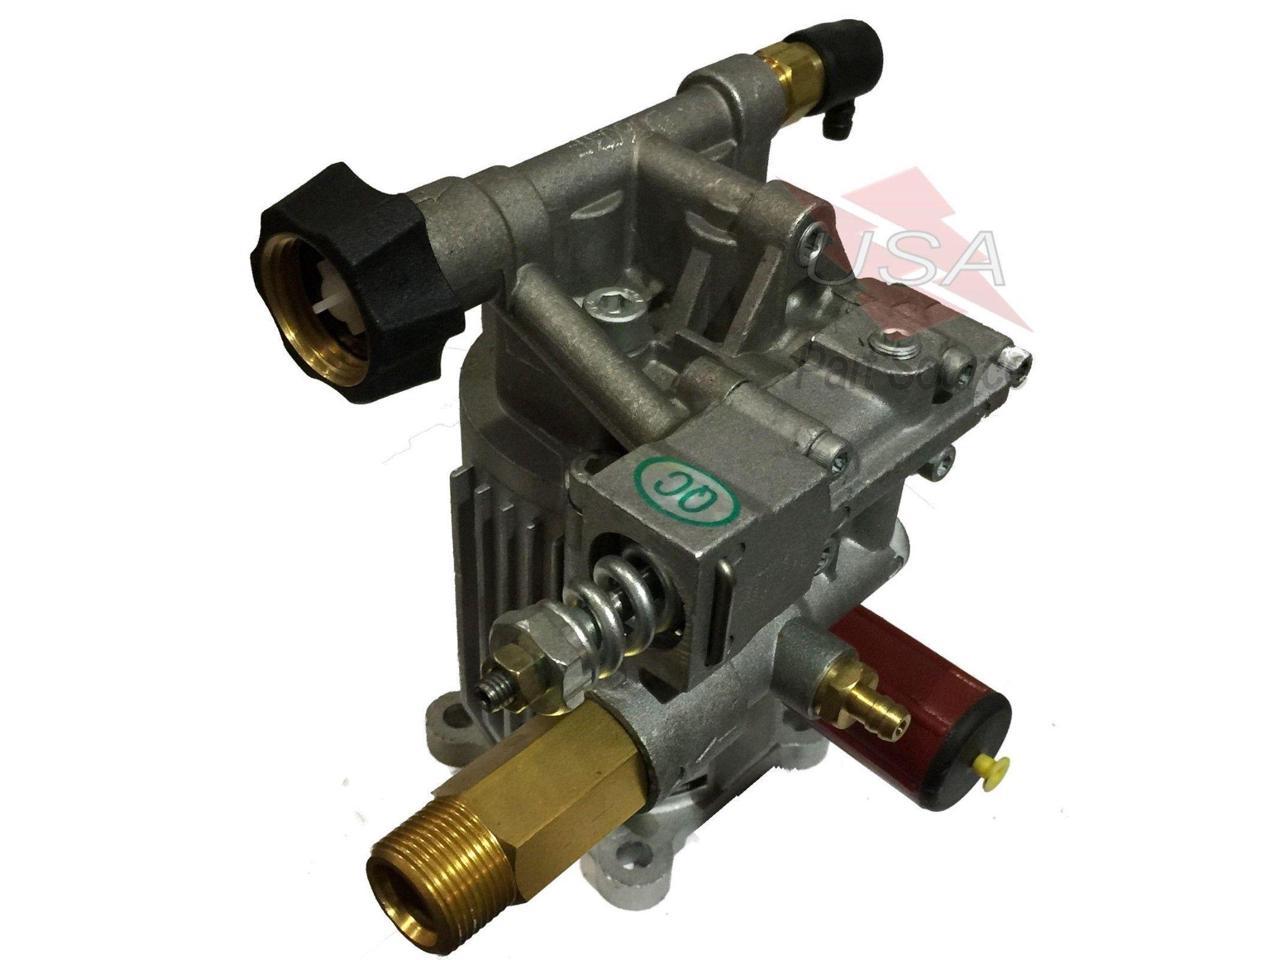 PRESSURE WASHER PUMP Replaces Honda Excell A01801 D28744 A14292 on XR2500 XR2600 